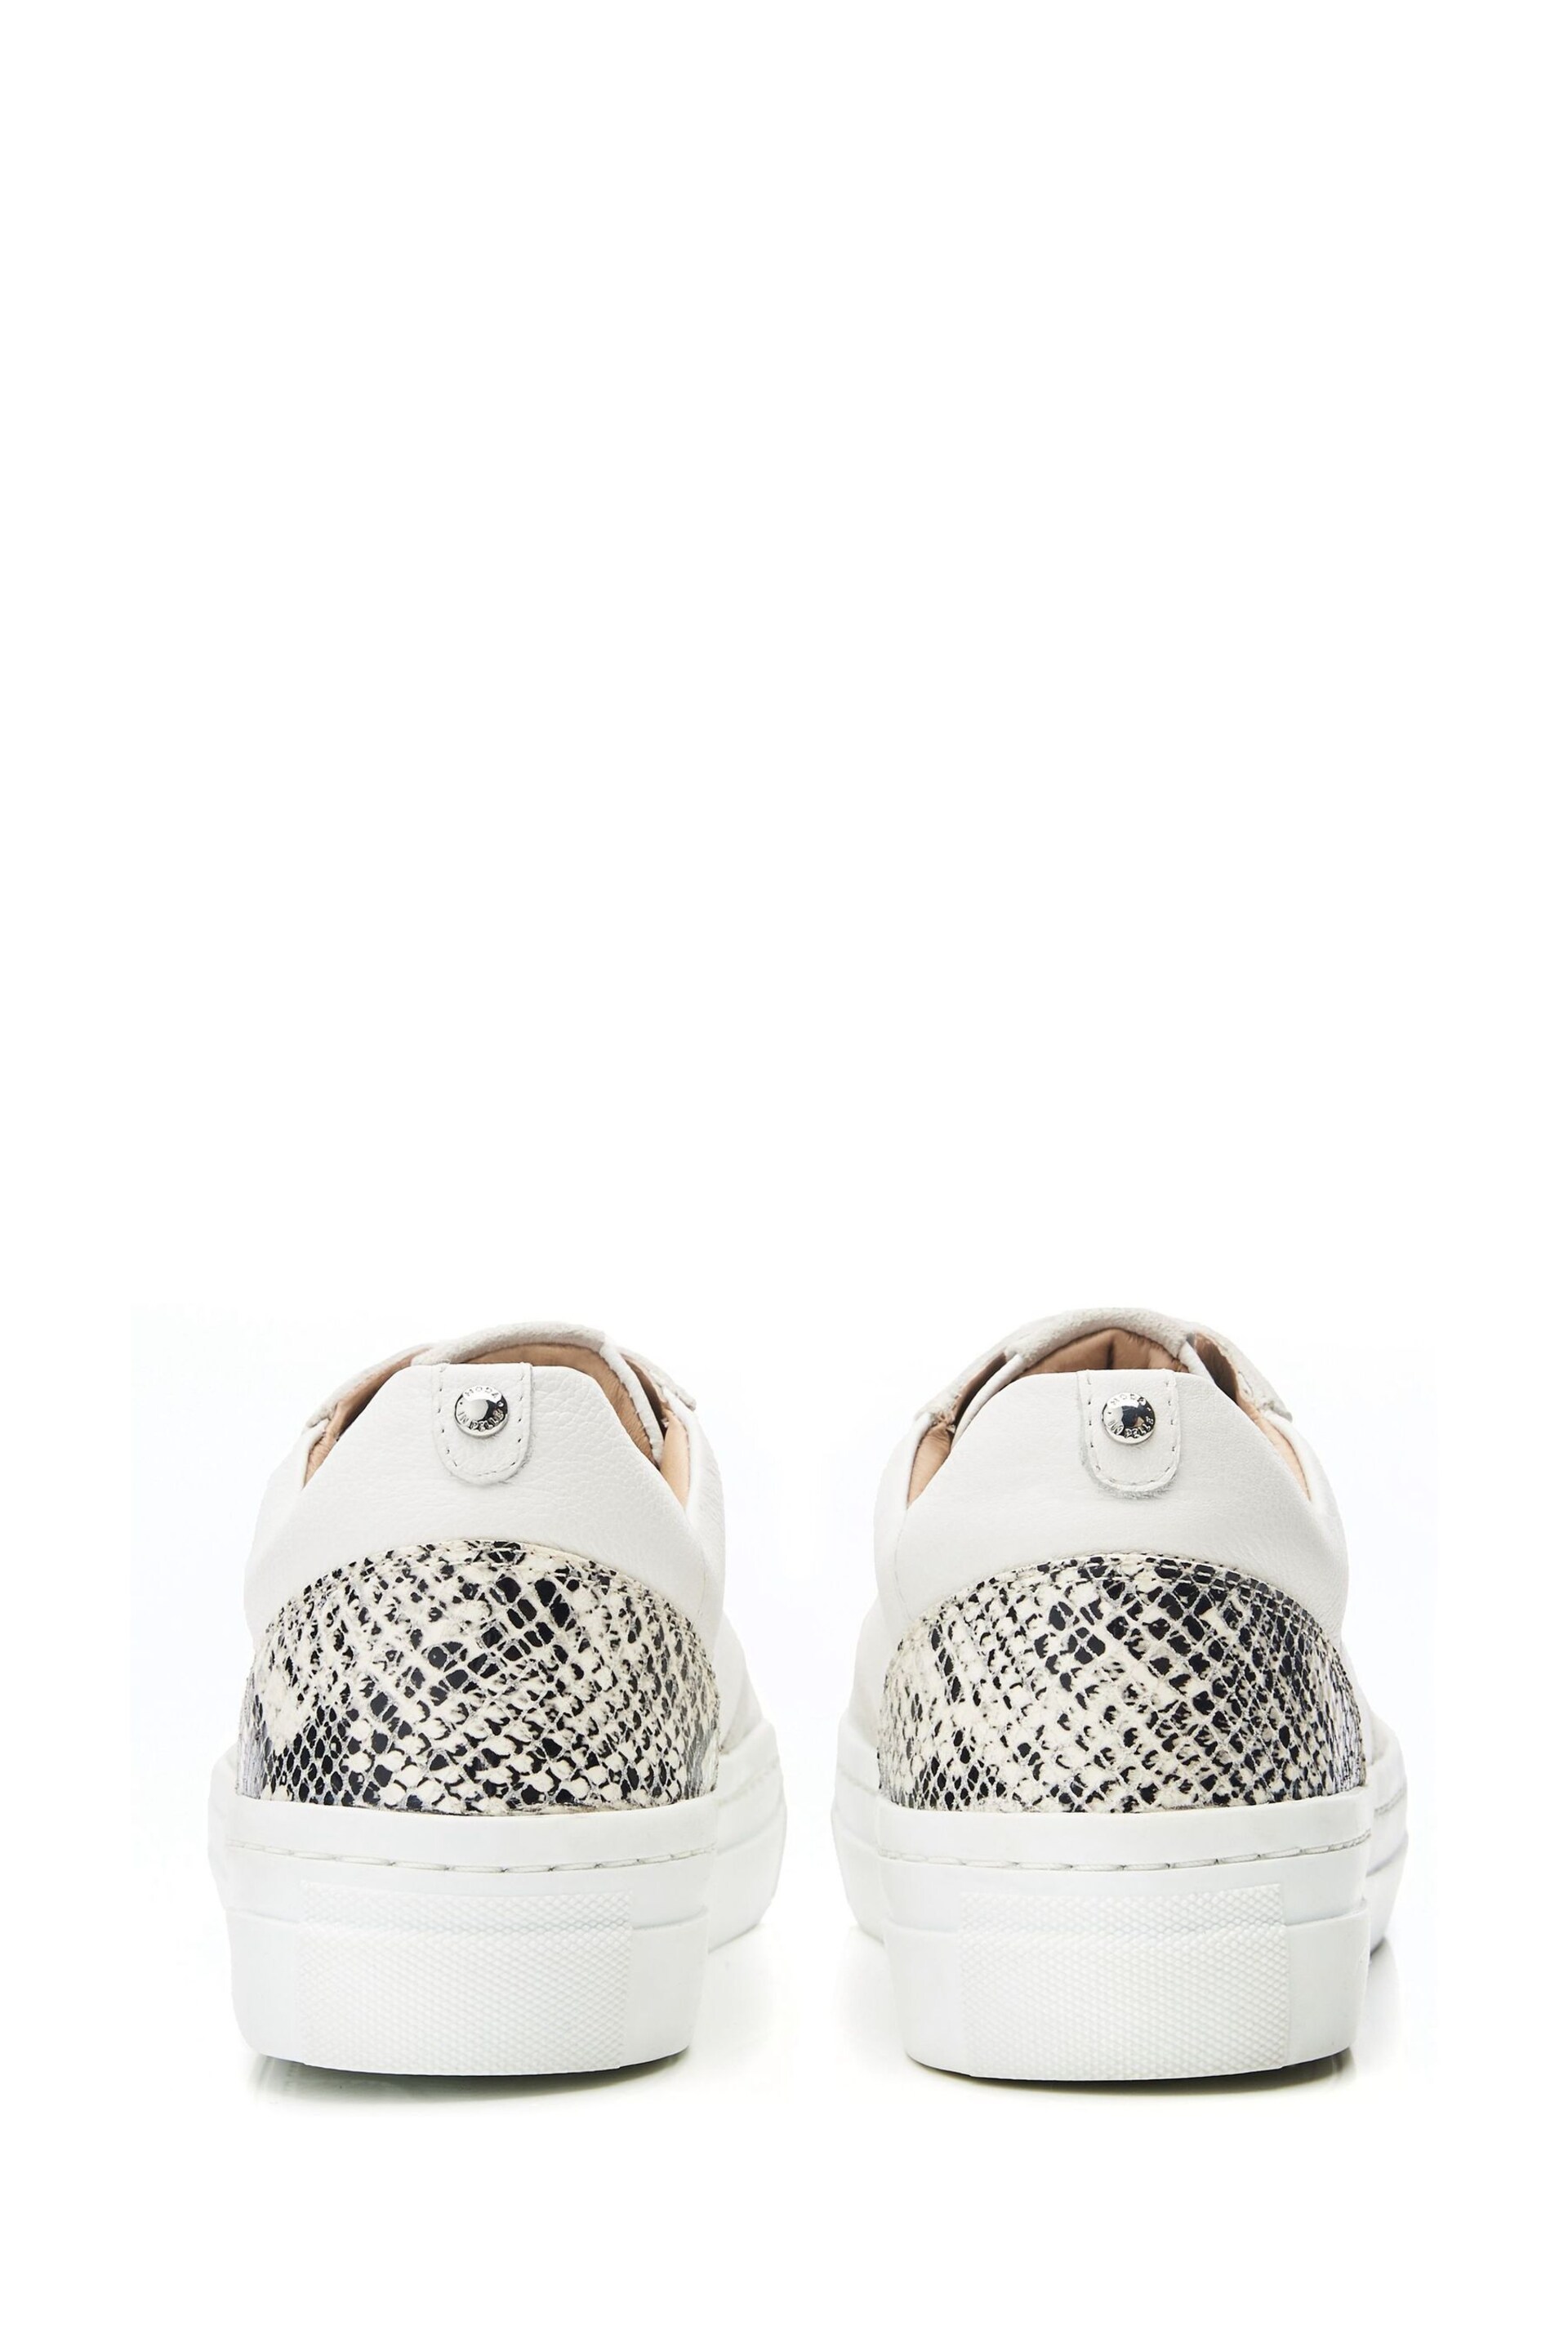 Moda in Pelle Adalaya Scallop Chunky White Trainers - Image 3 of 4